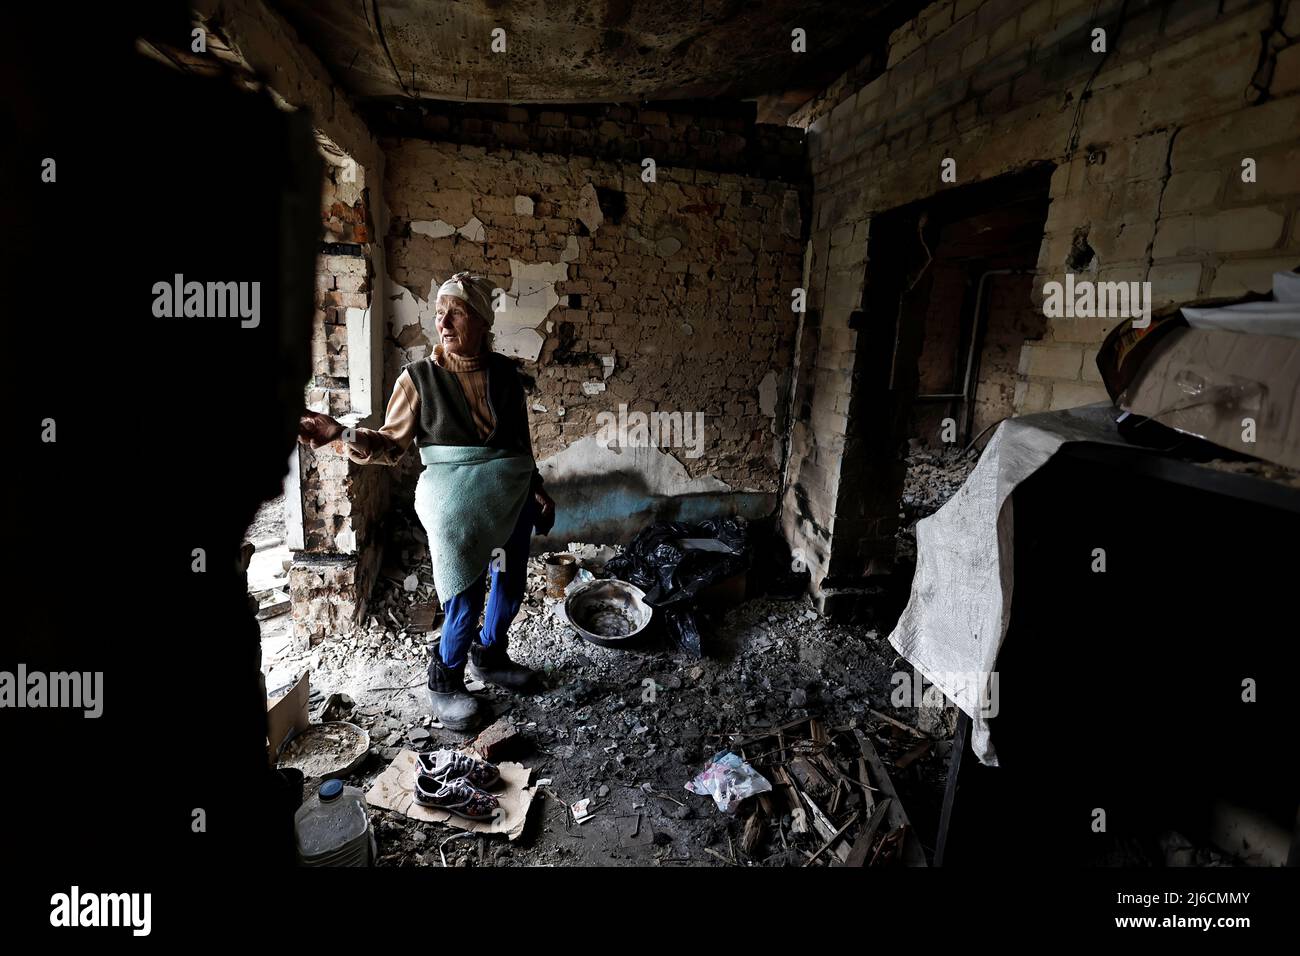 Hanna Selivon, 77, stands in what remains of her house, which according to her was destroyed by Russian shelling, amid their invasion of Ukraine, on the outskirts of Chernihiv, Ukraine April 30, 2022. Selivon said she now lives at the volunteer center in downtown Chernihiv and bikes everyday to her home to try to recover her belongings. REUTERS/Zohra Bensemra Stock Photo